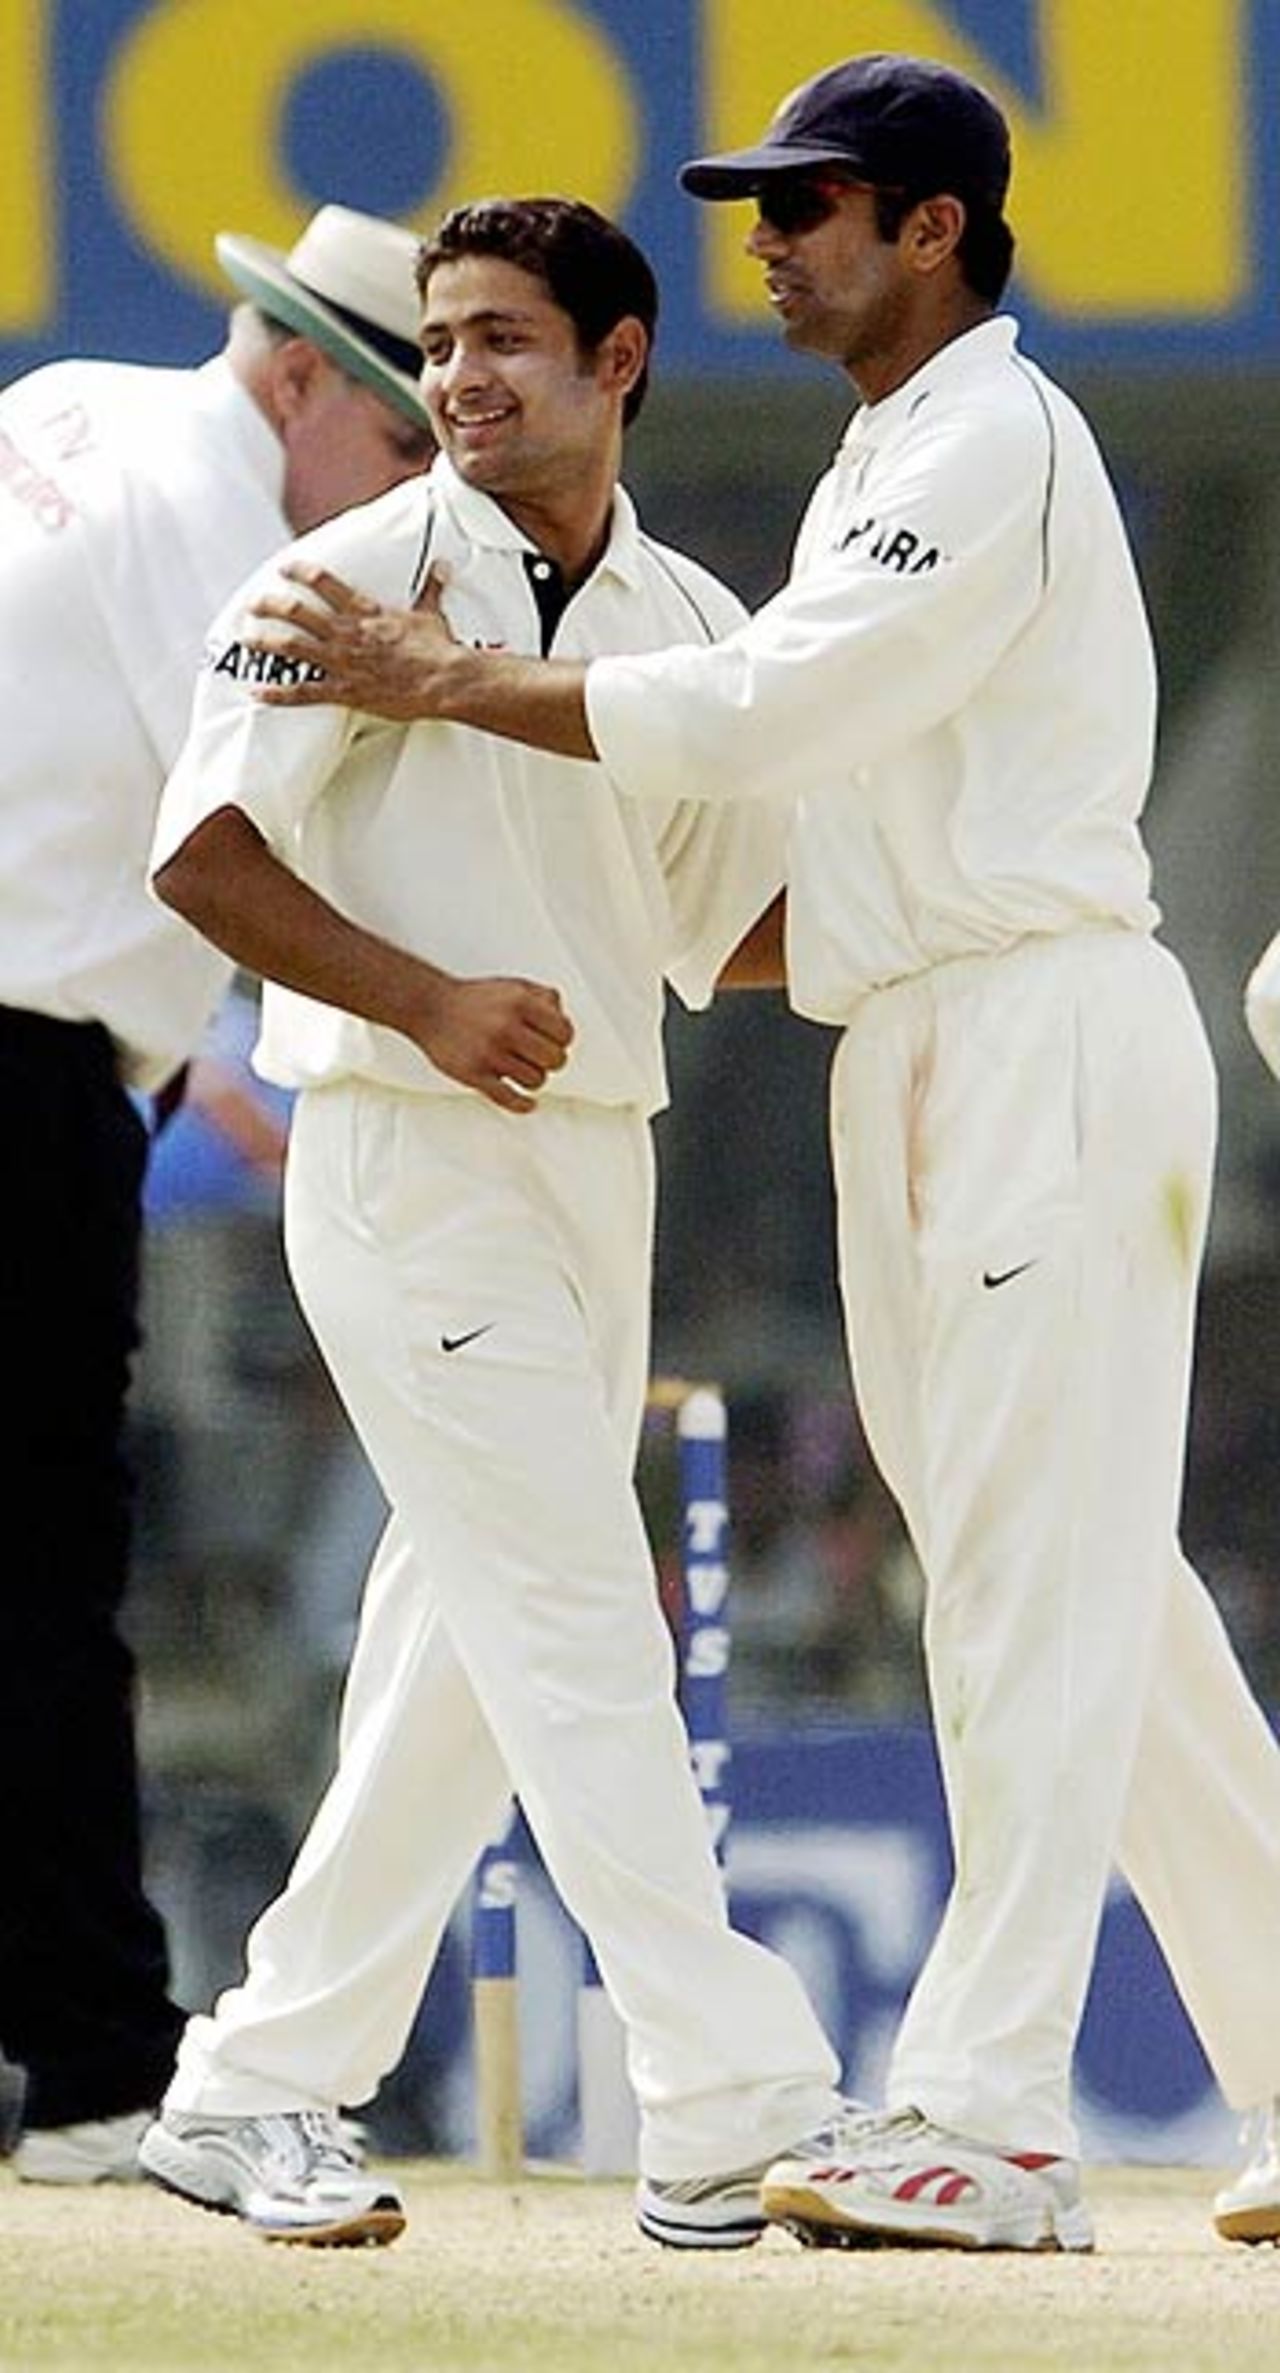 Rahul Dravid congratulates Piyush Chawla after his first Test wicket, India v England, 2nd Test, Mohali, March 12, 2006